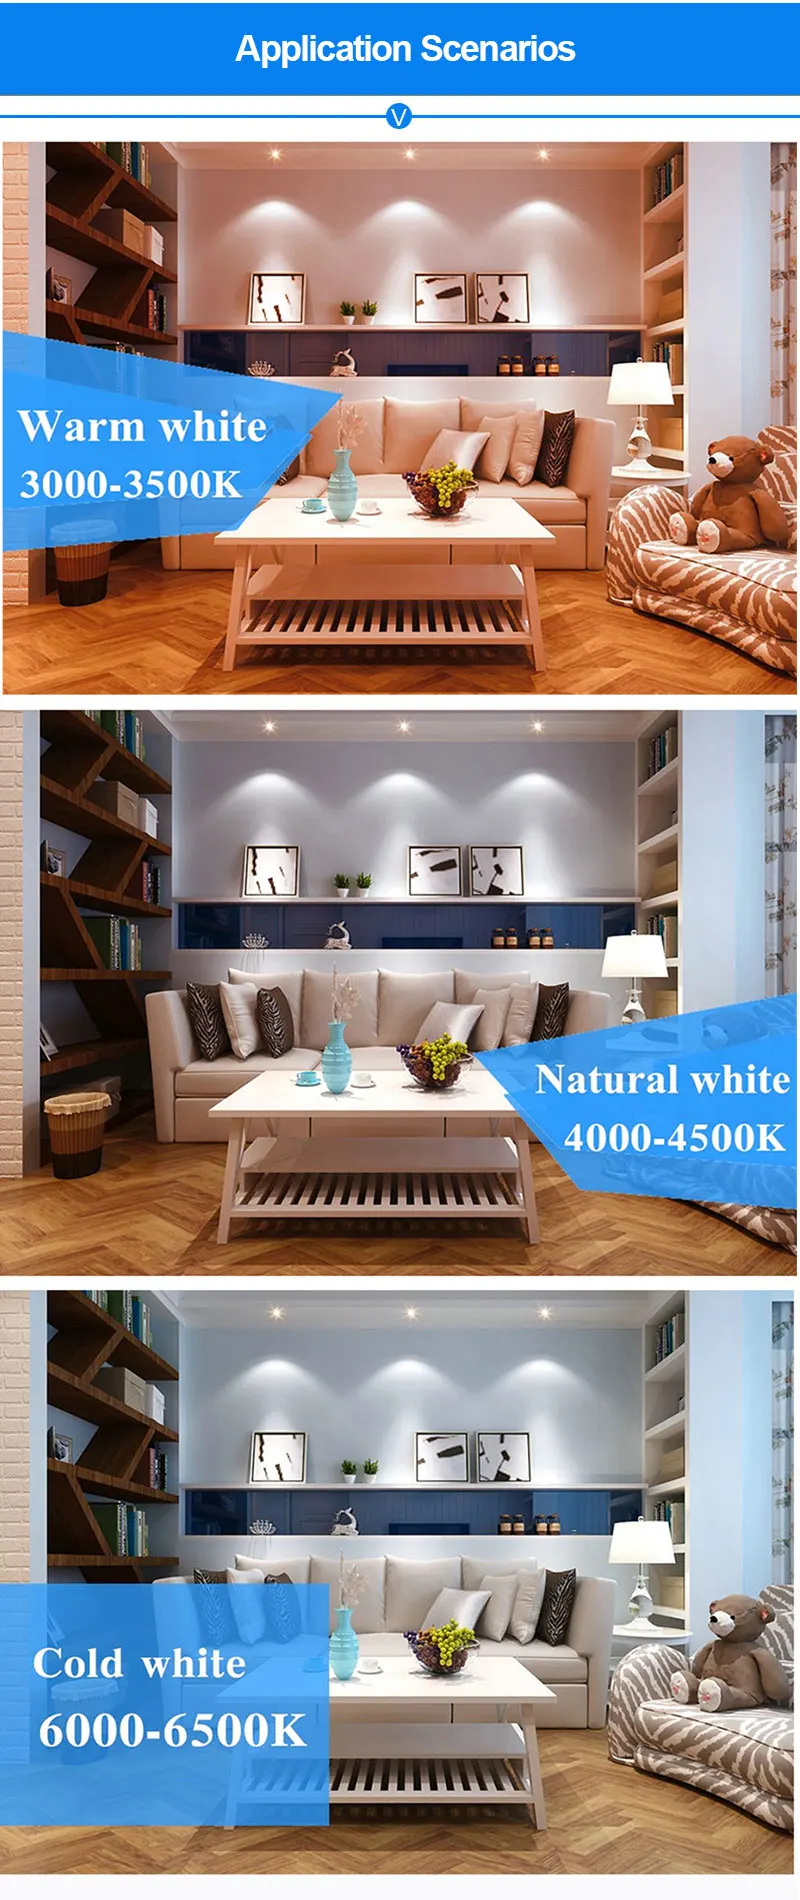 Dimmable Round LED Panel light 3w 4w 6w 9w 12w 15w 18w Recessed Downlight White/Warm White/Natural White Kitchen for Bathroom